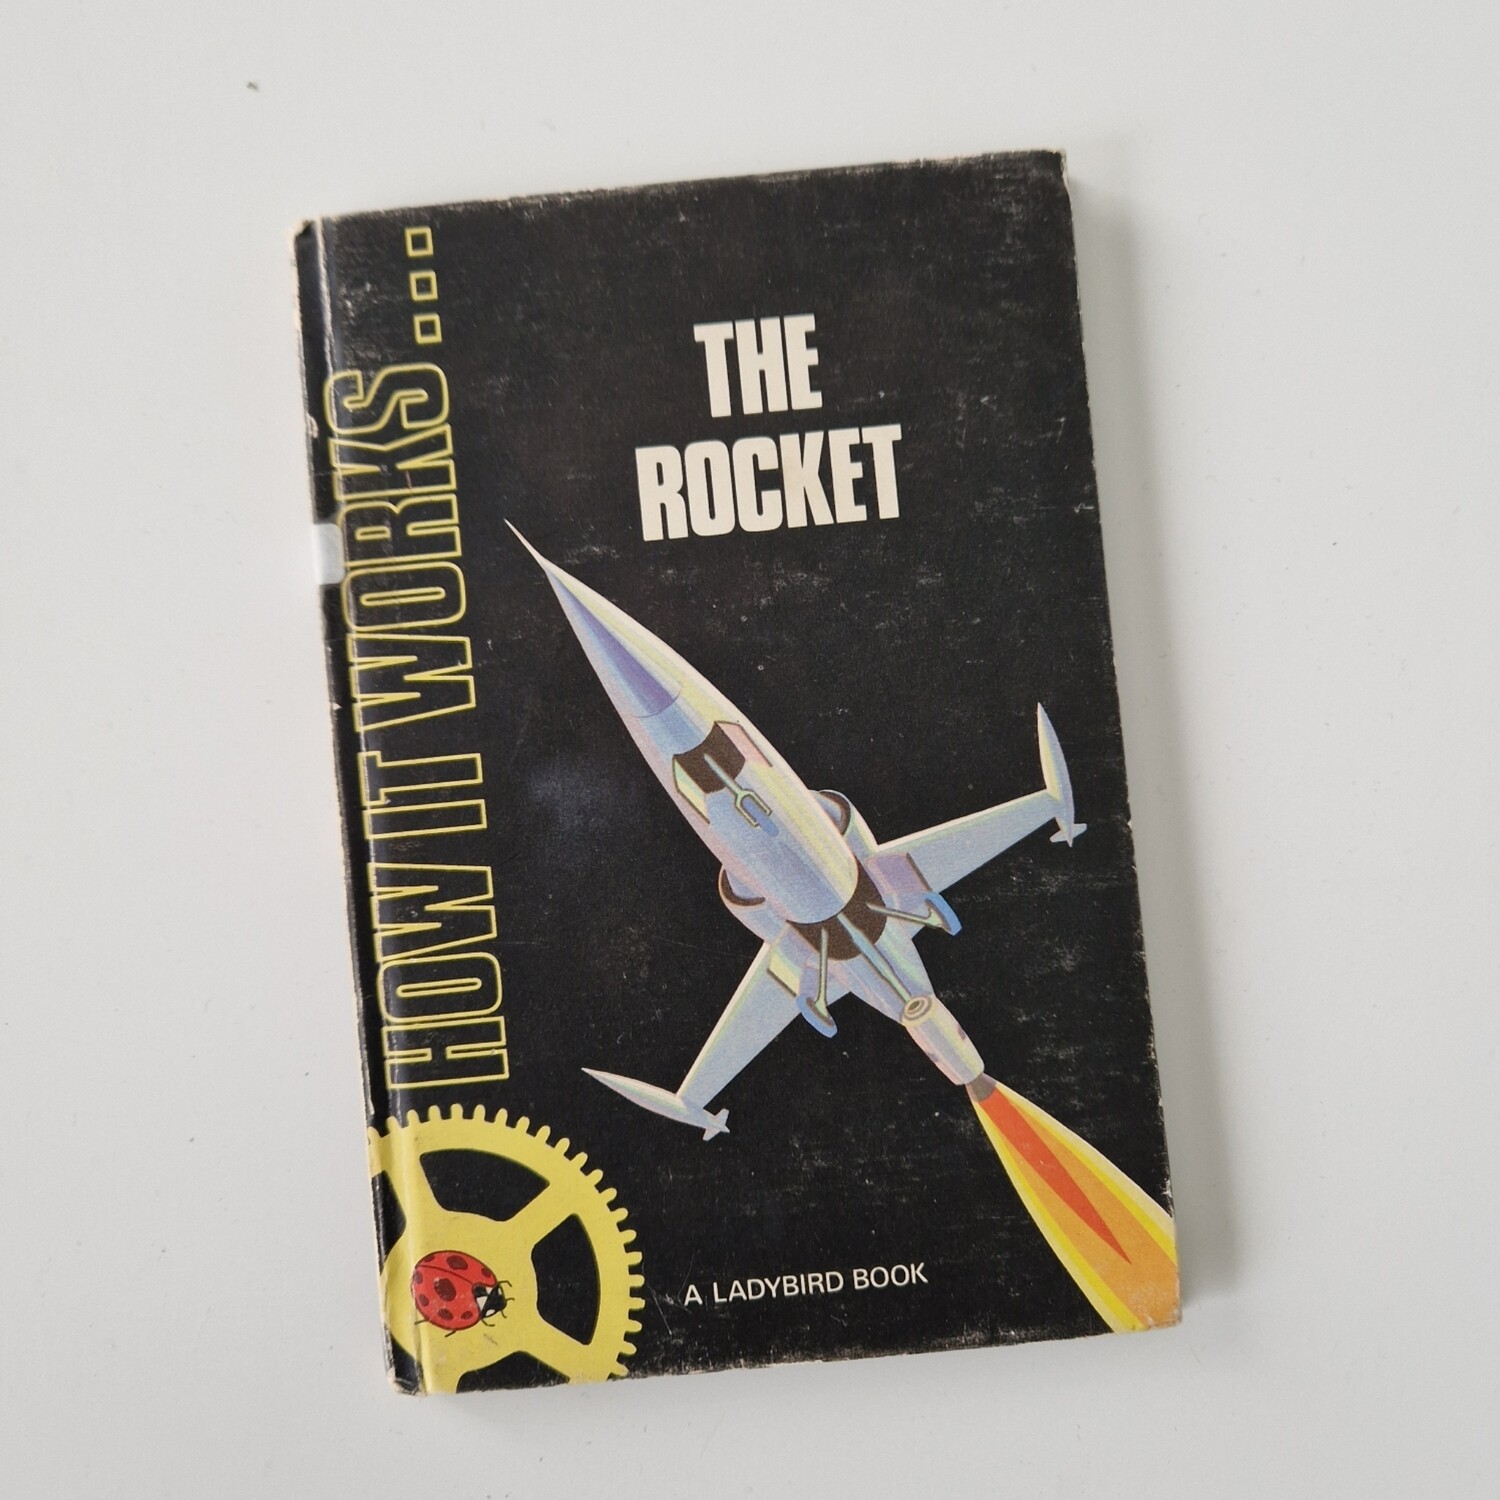 The Rocket - Science Ladybird Book late 1970s